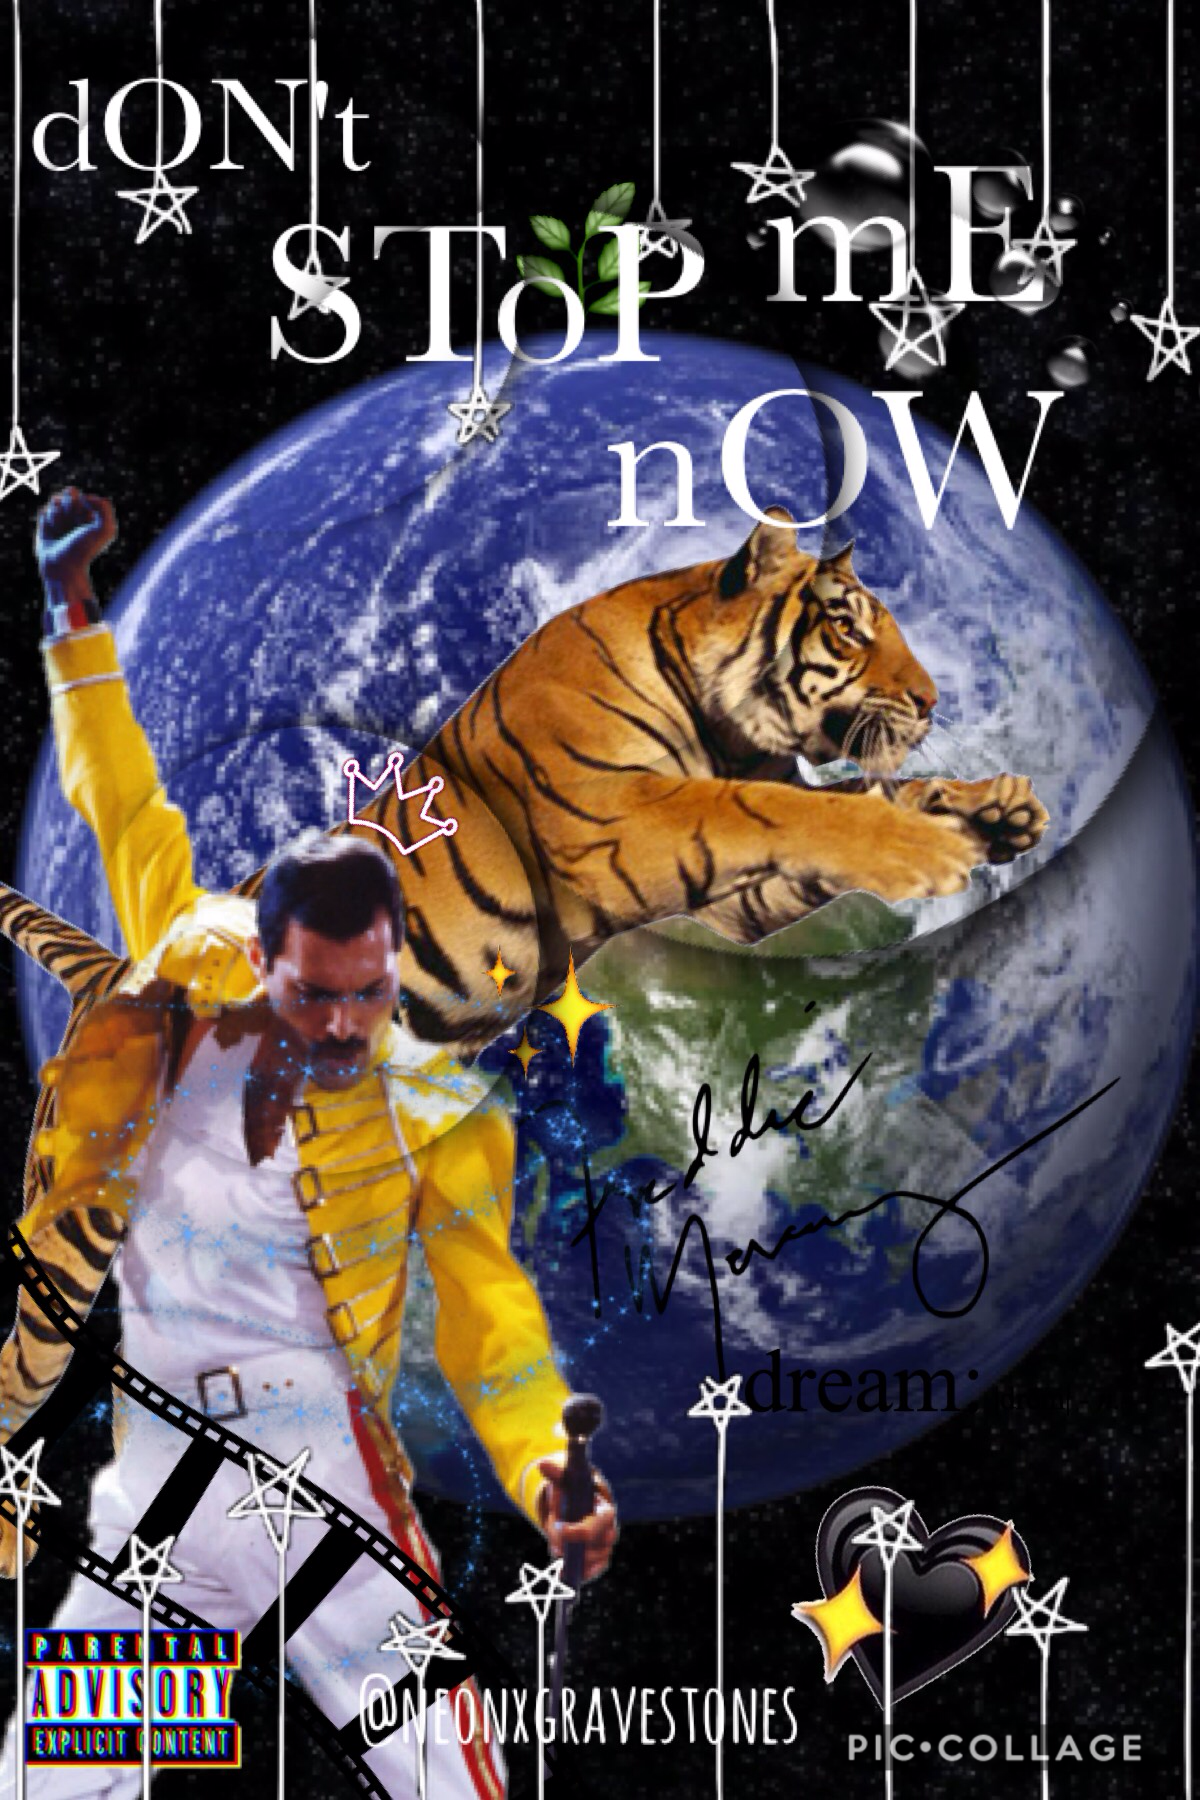 🐯Don't Stop Me Now🐯



More collages coming soon! Right now, I am working on about 6 collages. Next week I will be posting more (maybe one collage per day) and a special Valentines Day collage on Valentines Day🌹